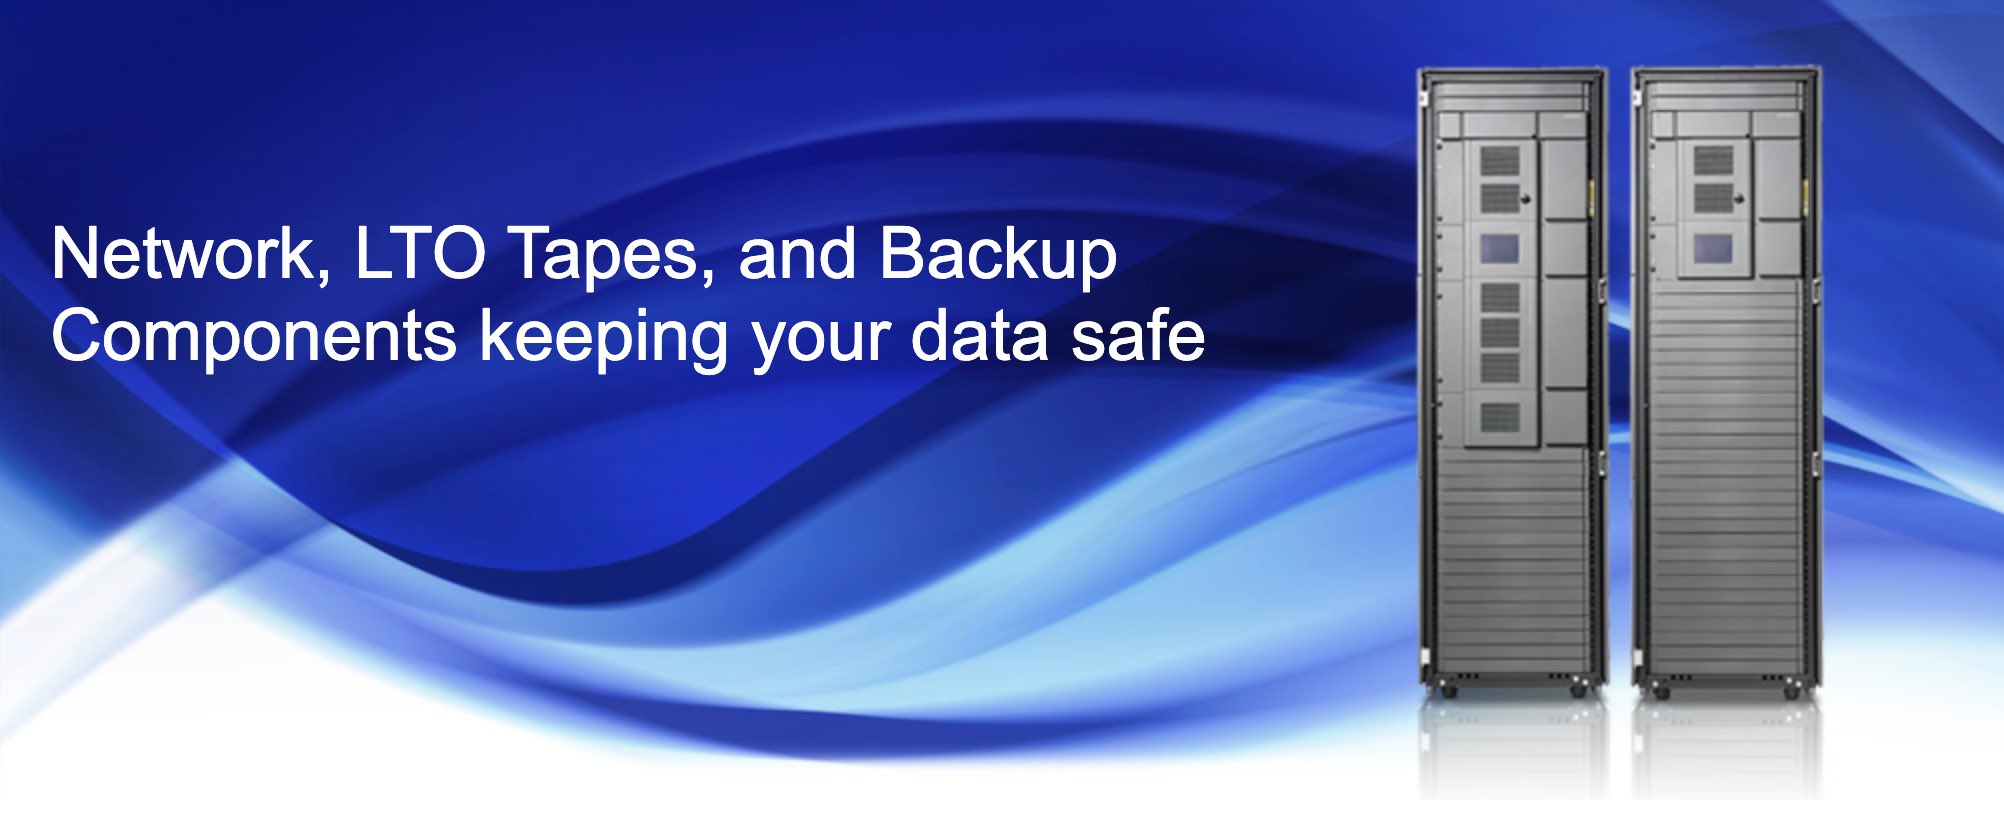 Network, LTO Tapes, and Backup Components keeping your data safe